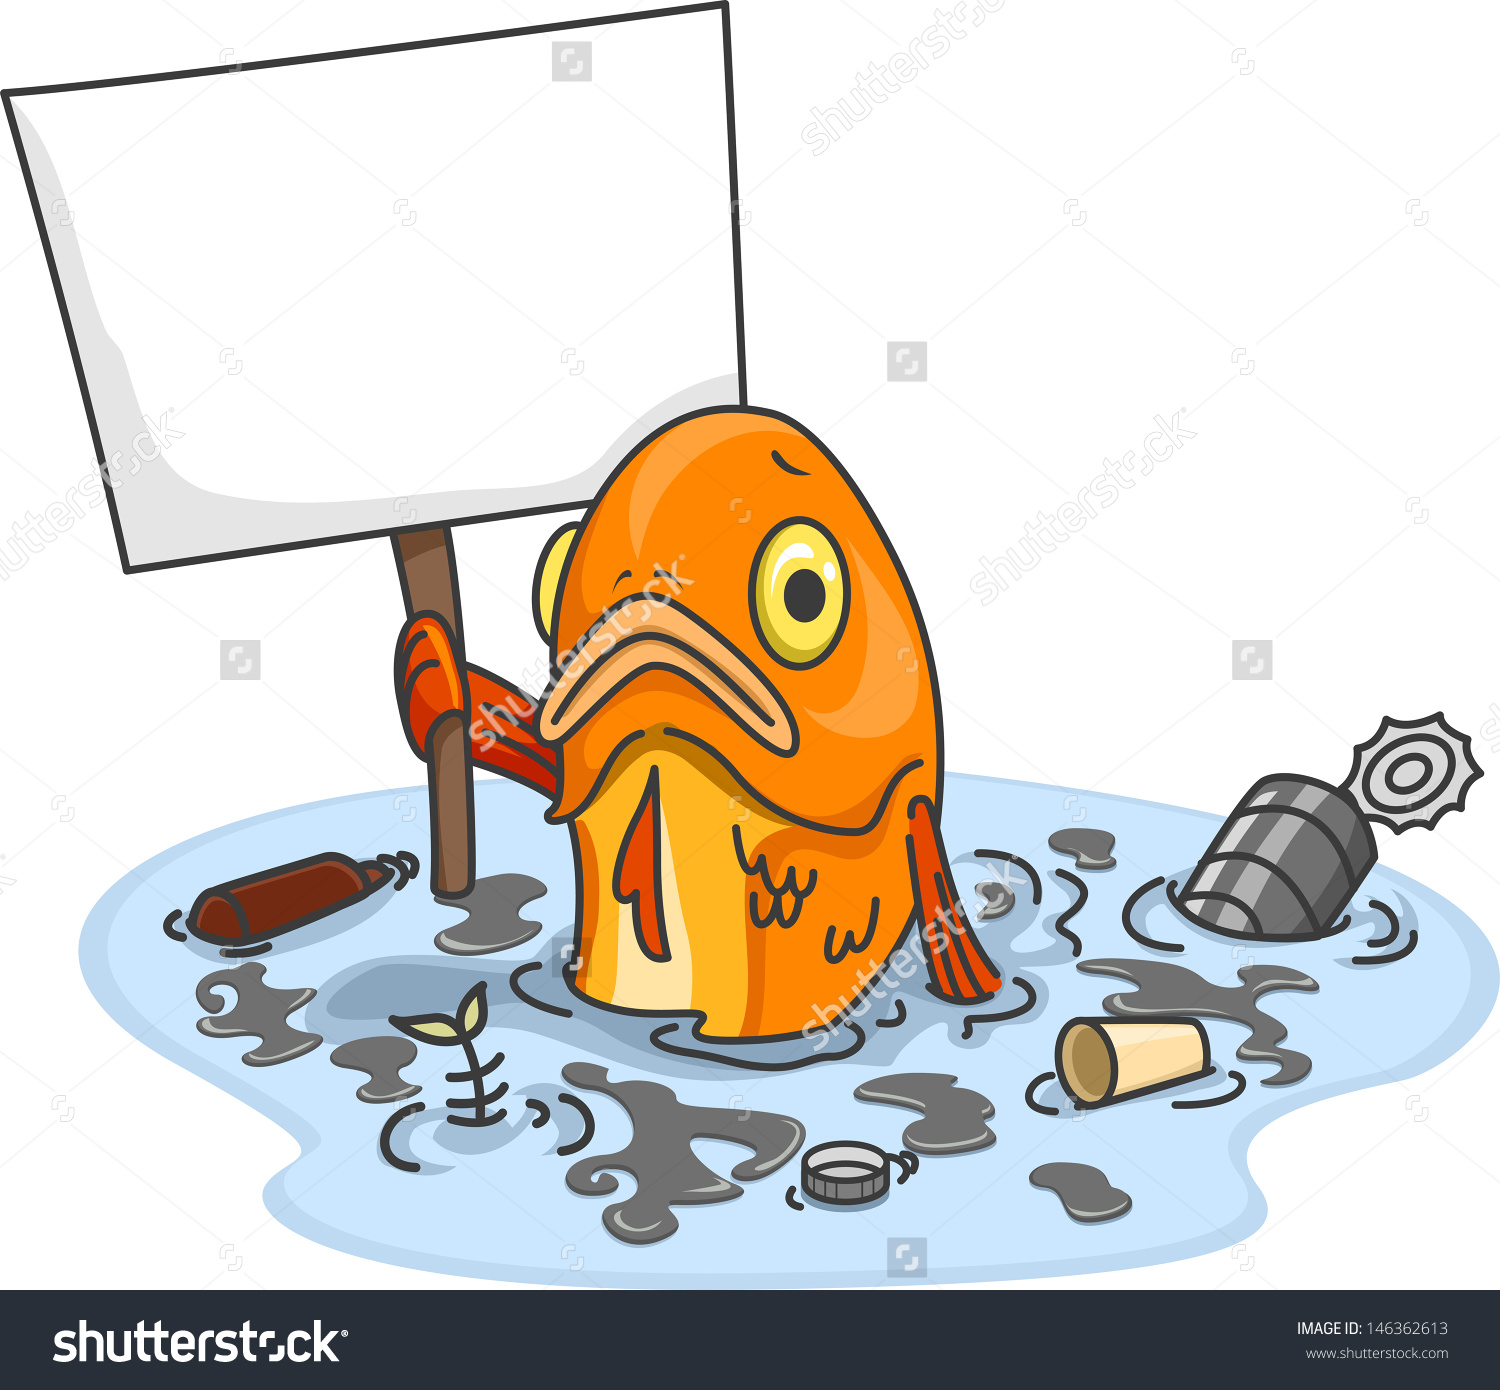 clipart on water pollution - photo #4